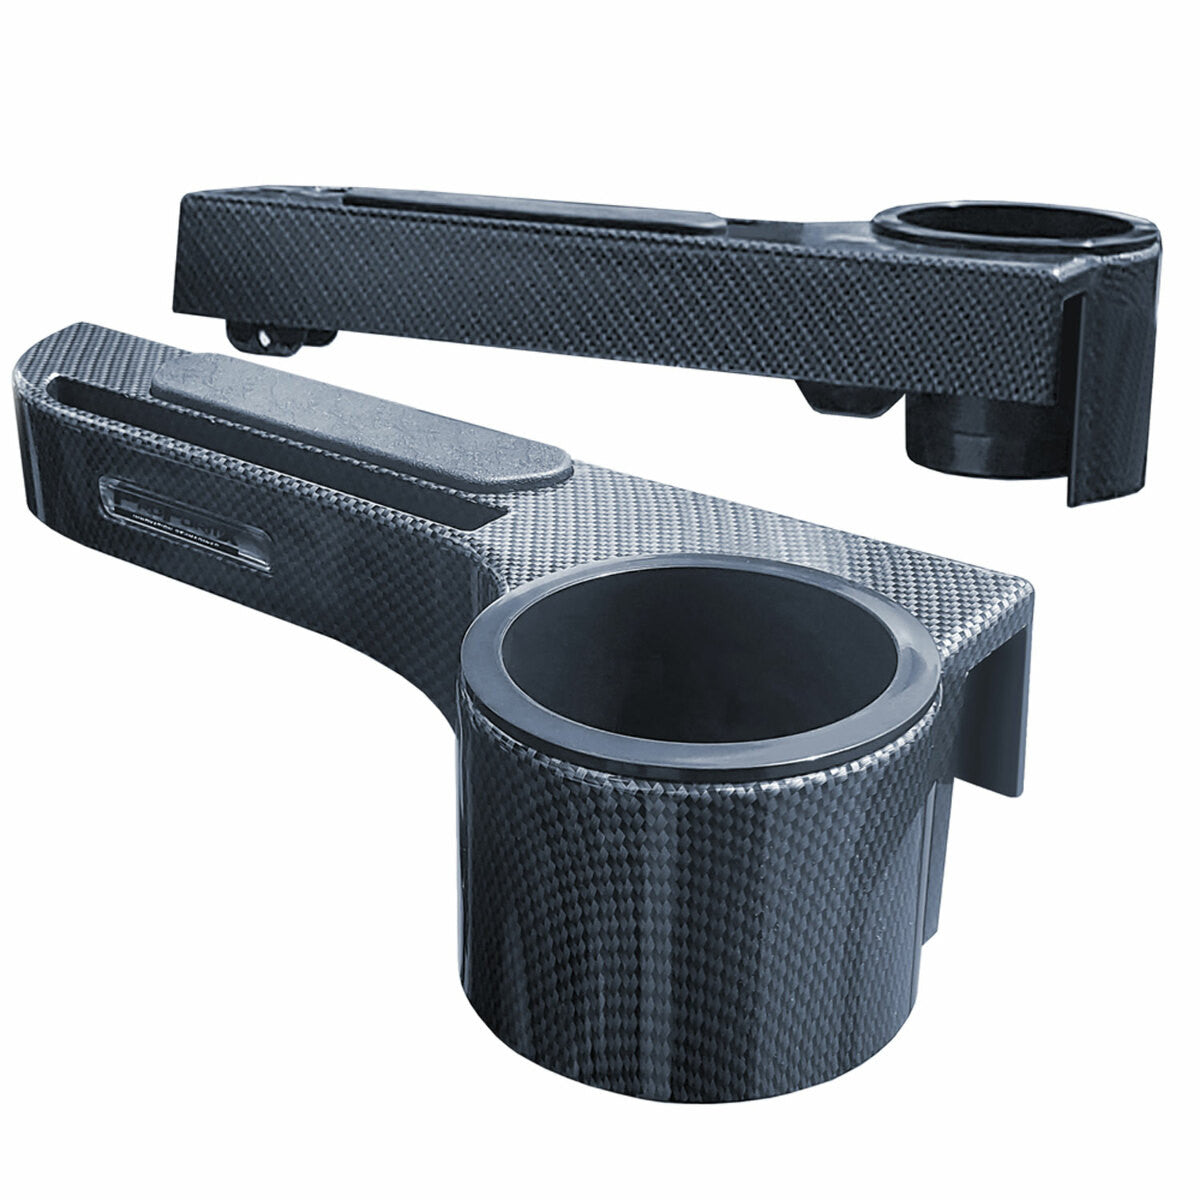 ProFormX Carbon Fiber Armrest with Cup Holder and Phone Holder (Pair)